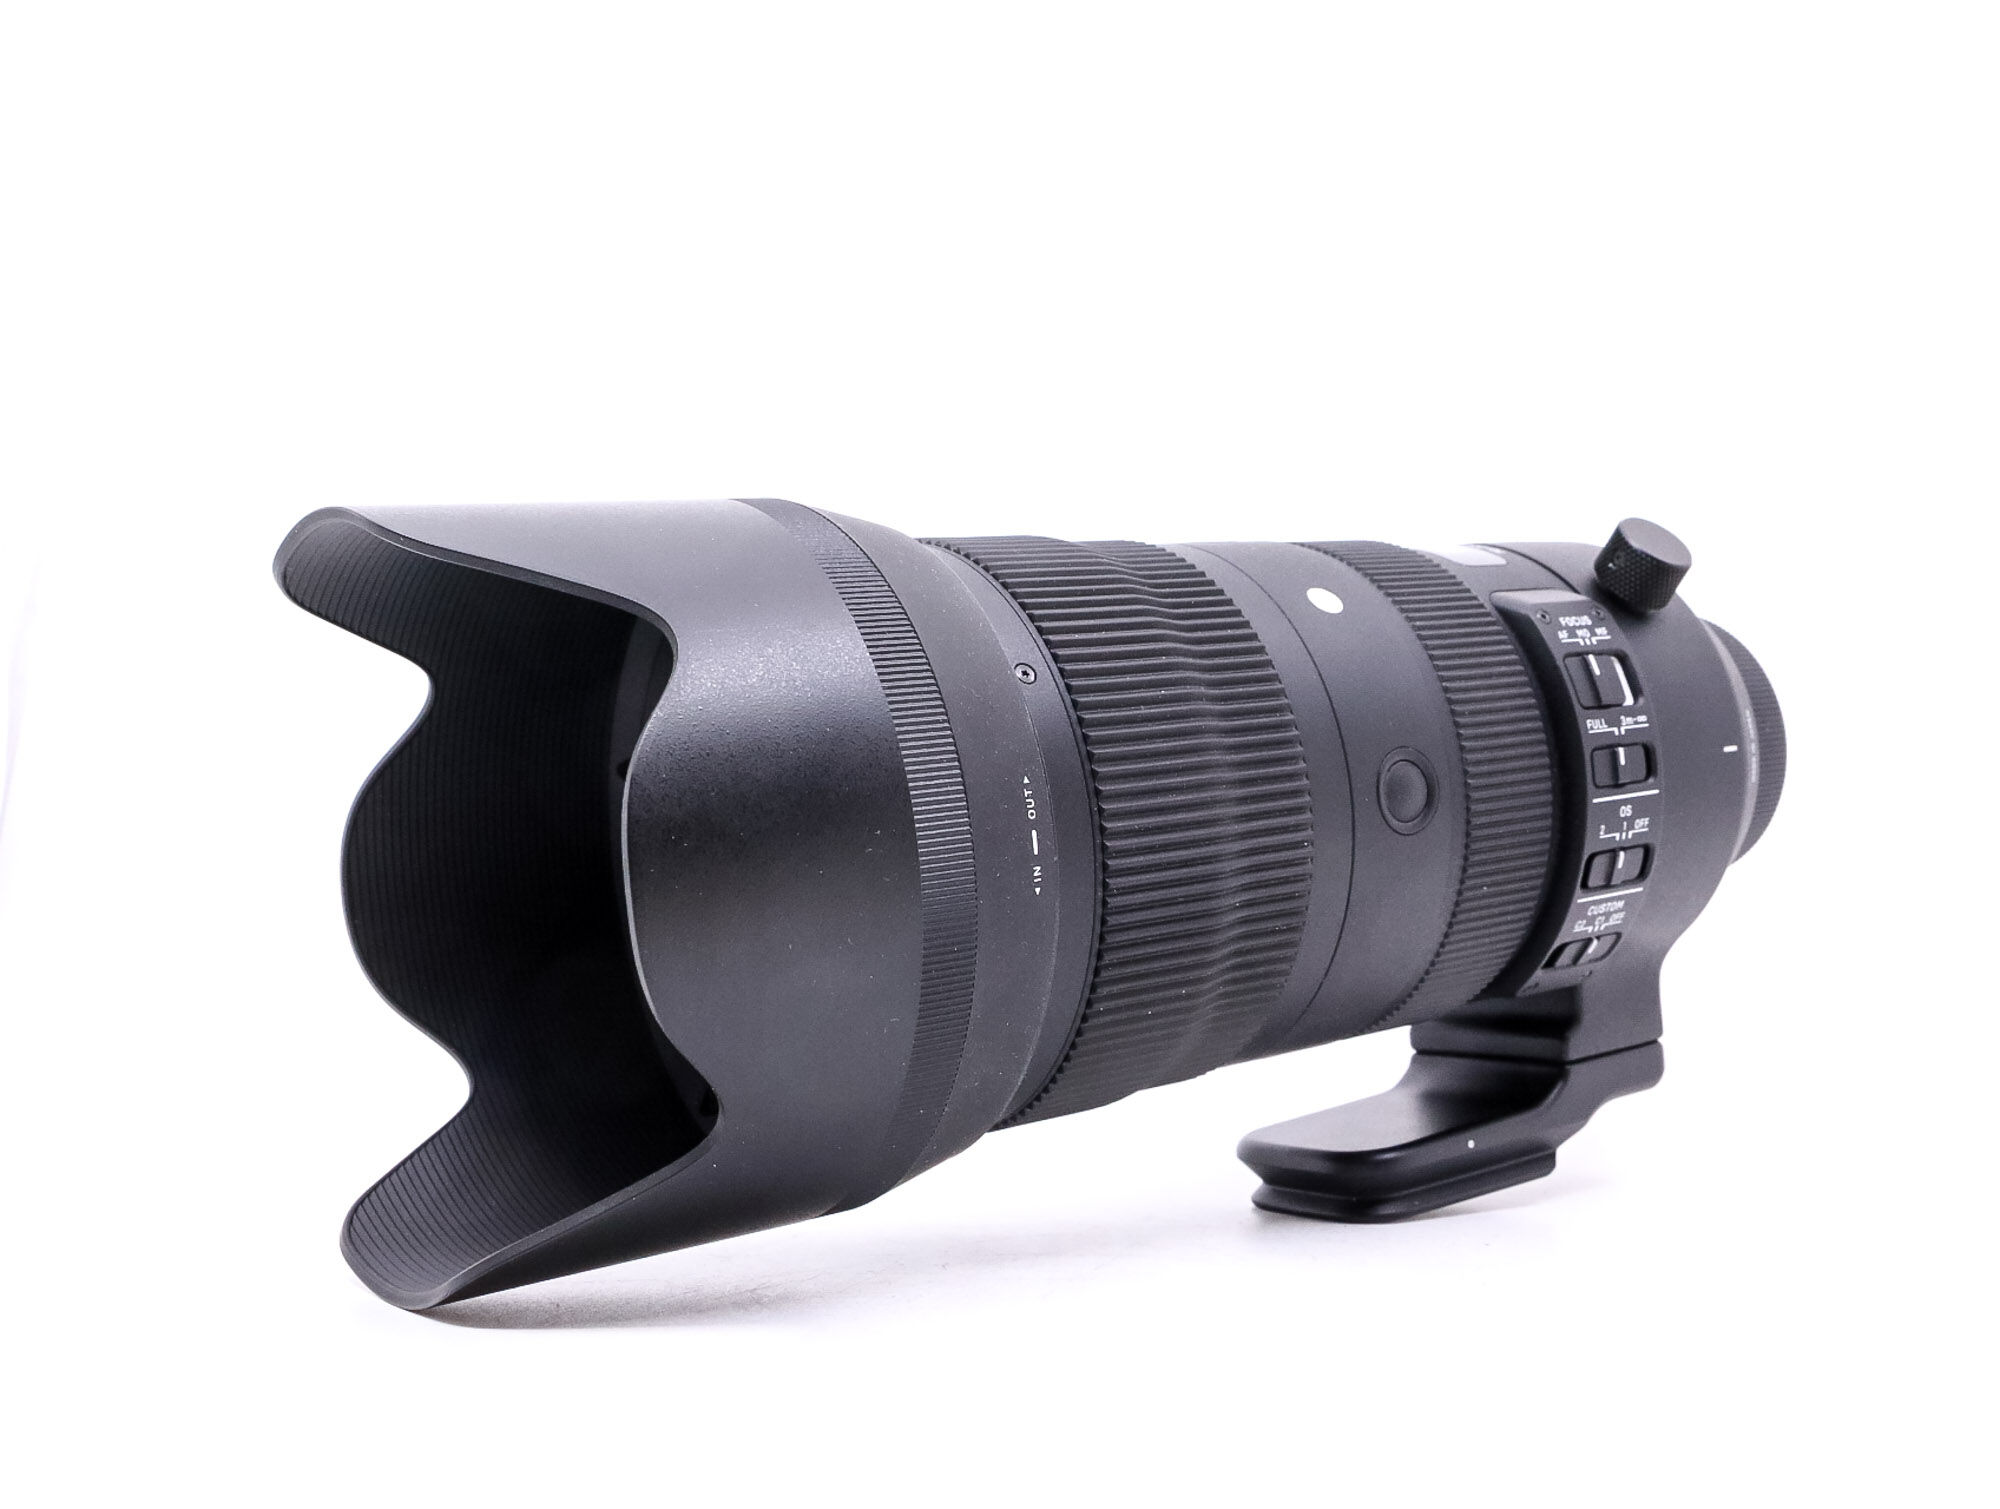 sigma 70-200mm f/2.8 dg os hsm sport nikon fit (condition: like new)